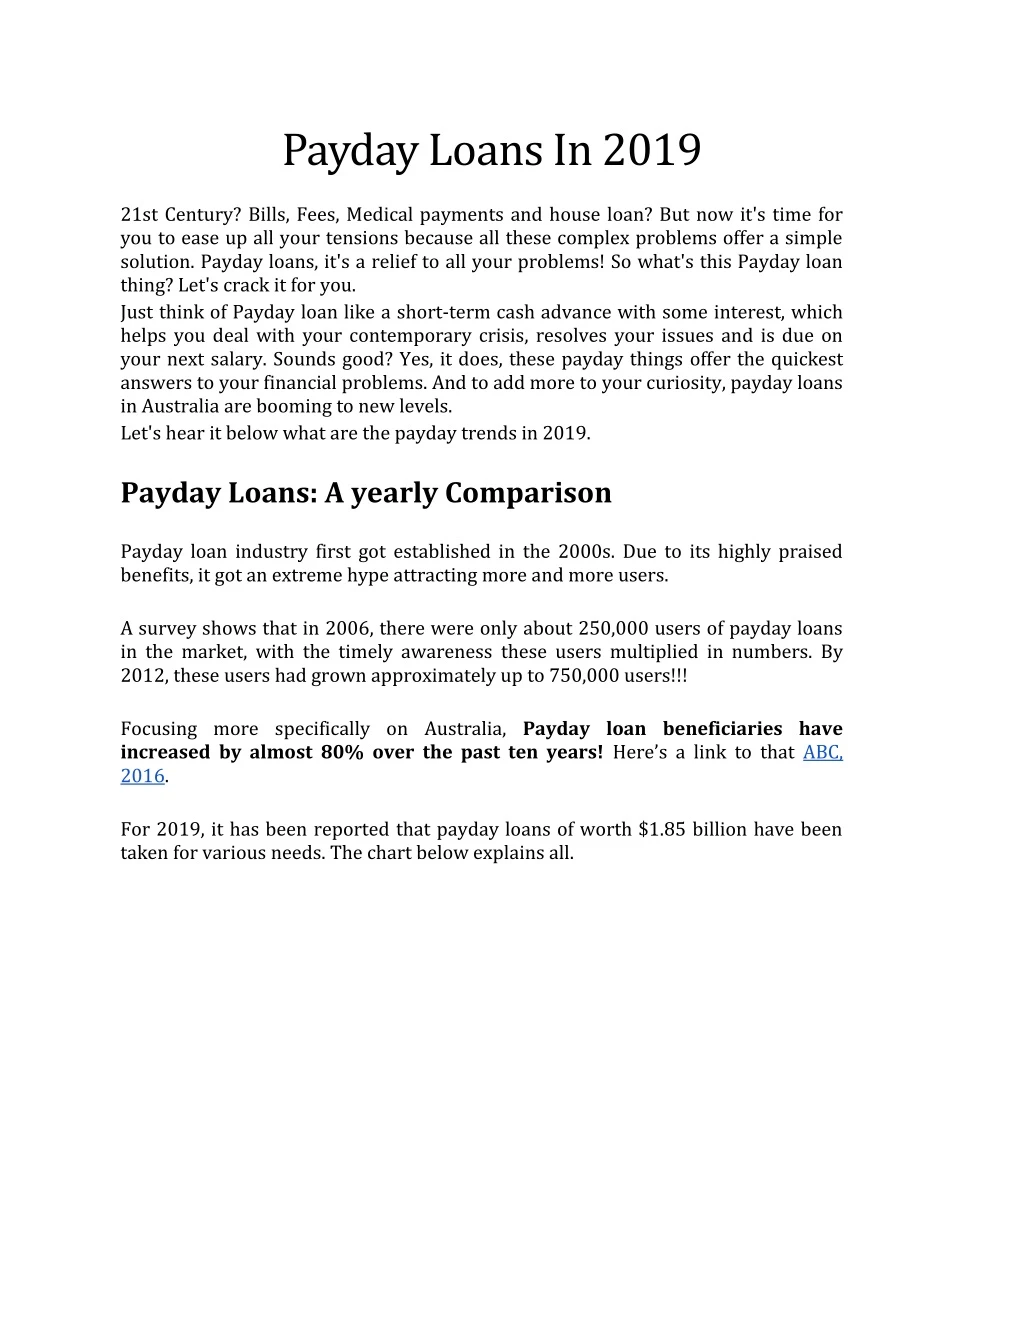 payday loans in 2019 21st century bills fees